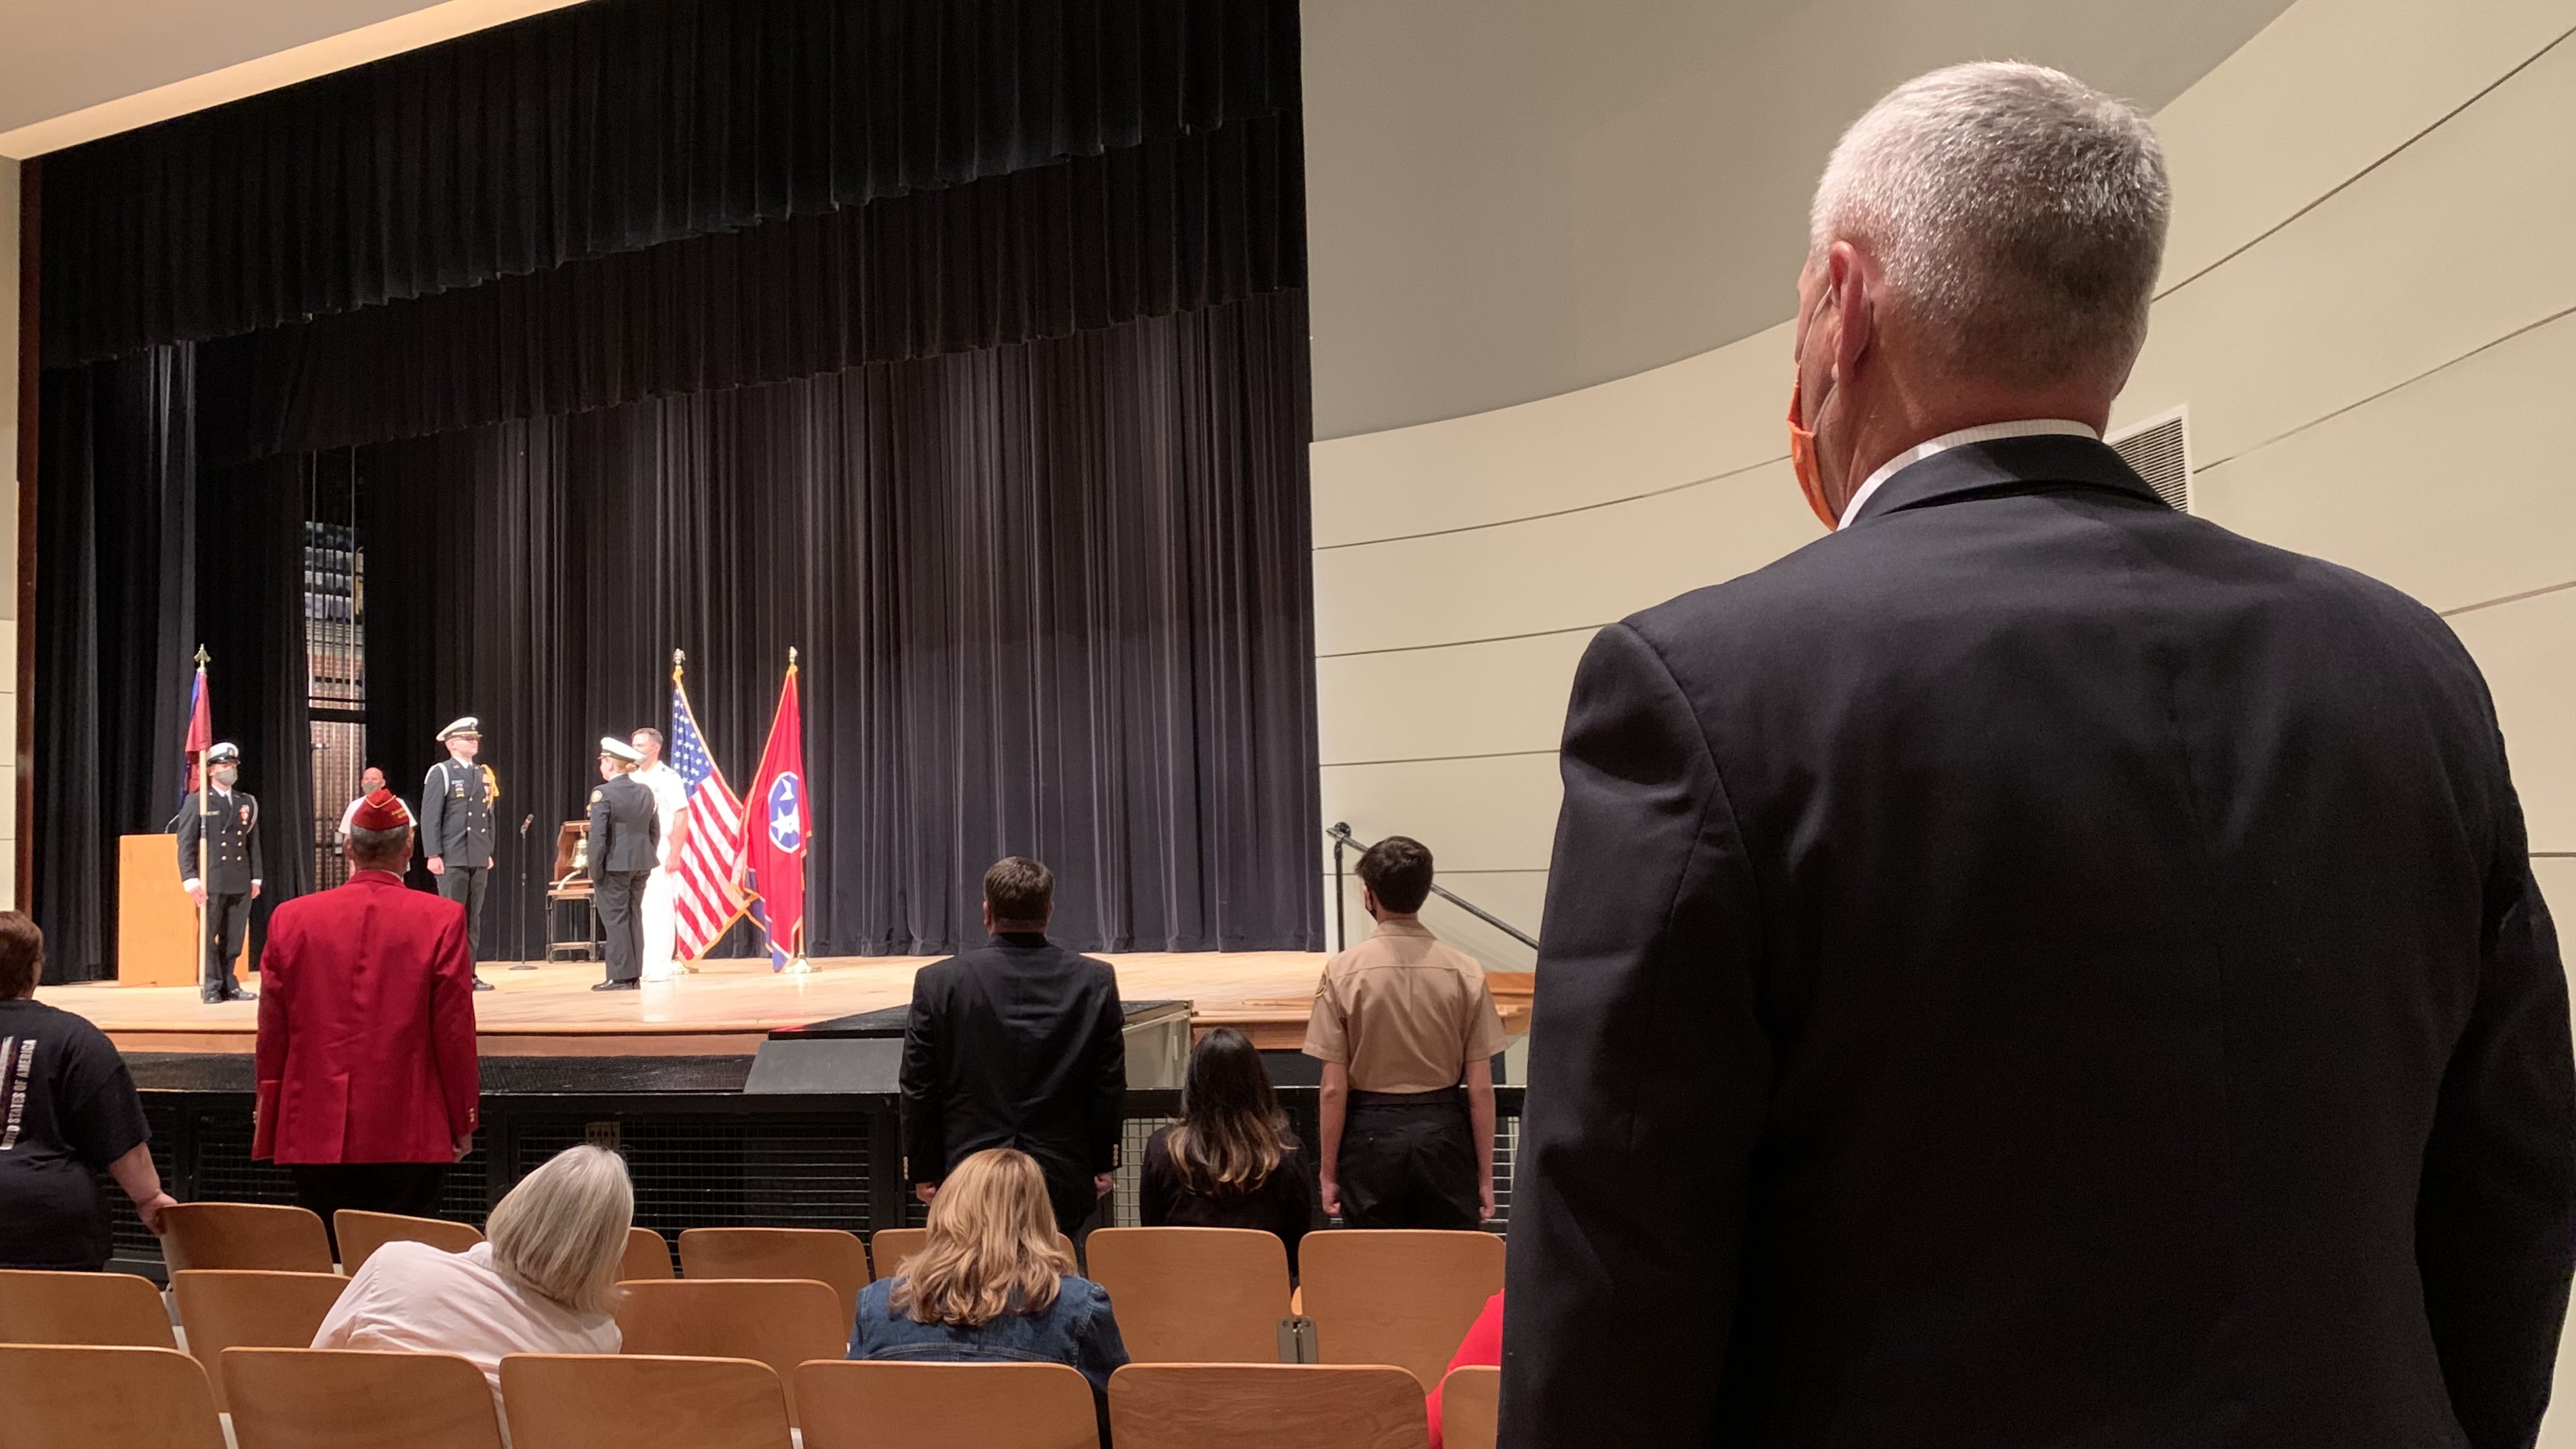 Veterans, cadets, and members of the military, including retired Capt. Gene Sievers at right, stood to recognize the change of command at the end of the evening’s ceremony.